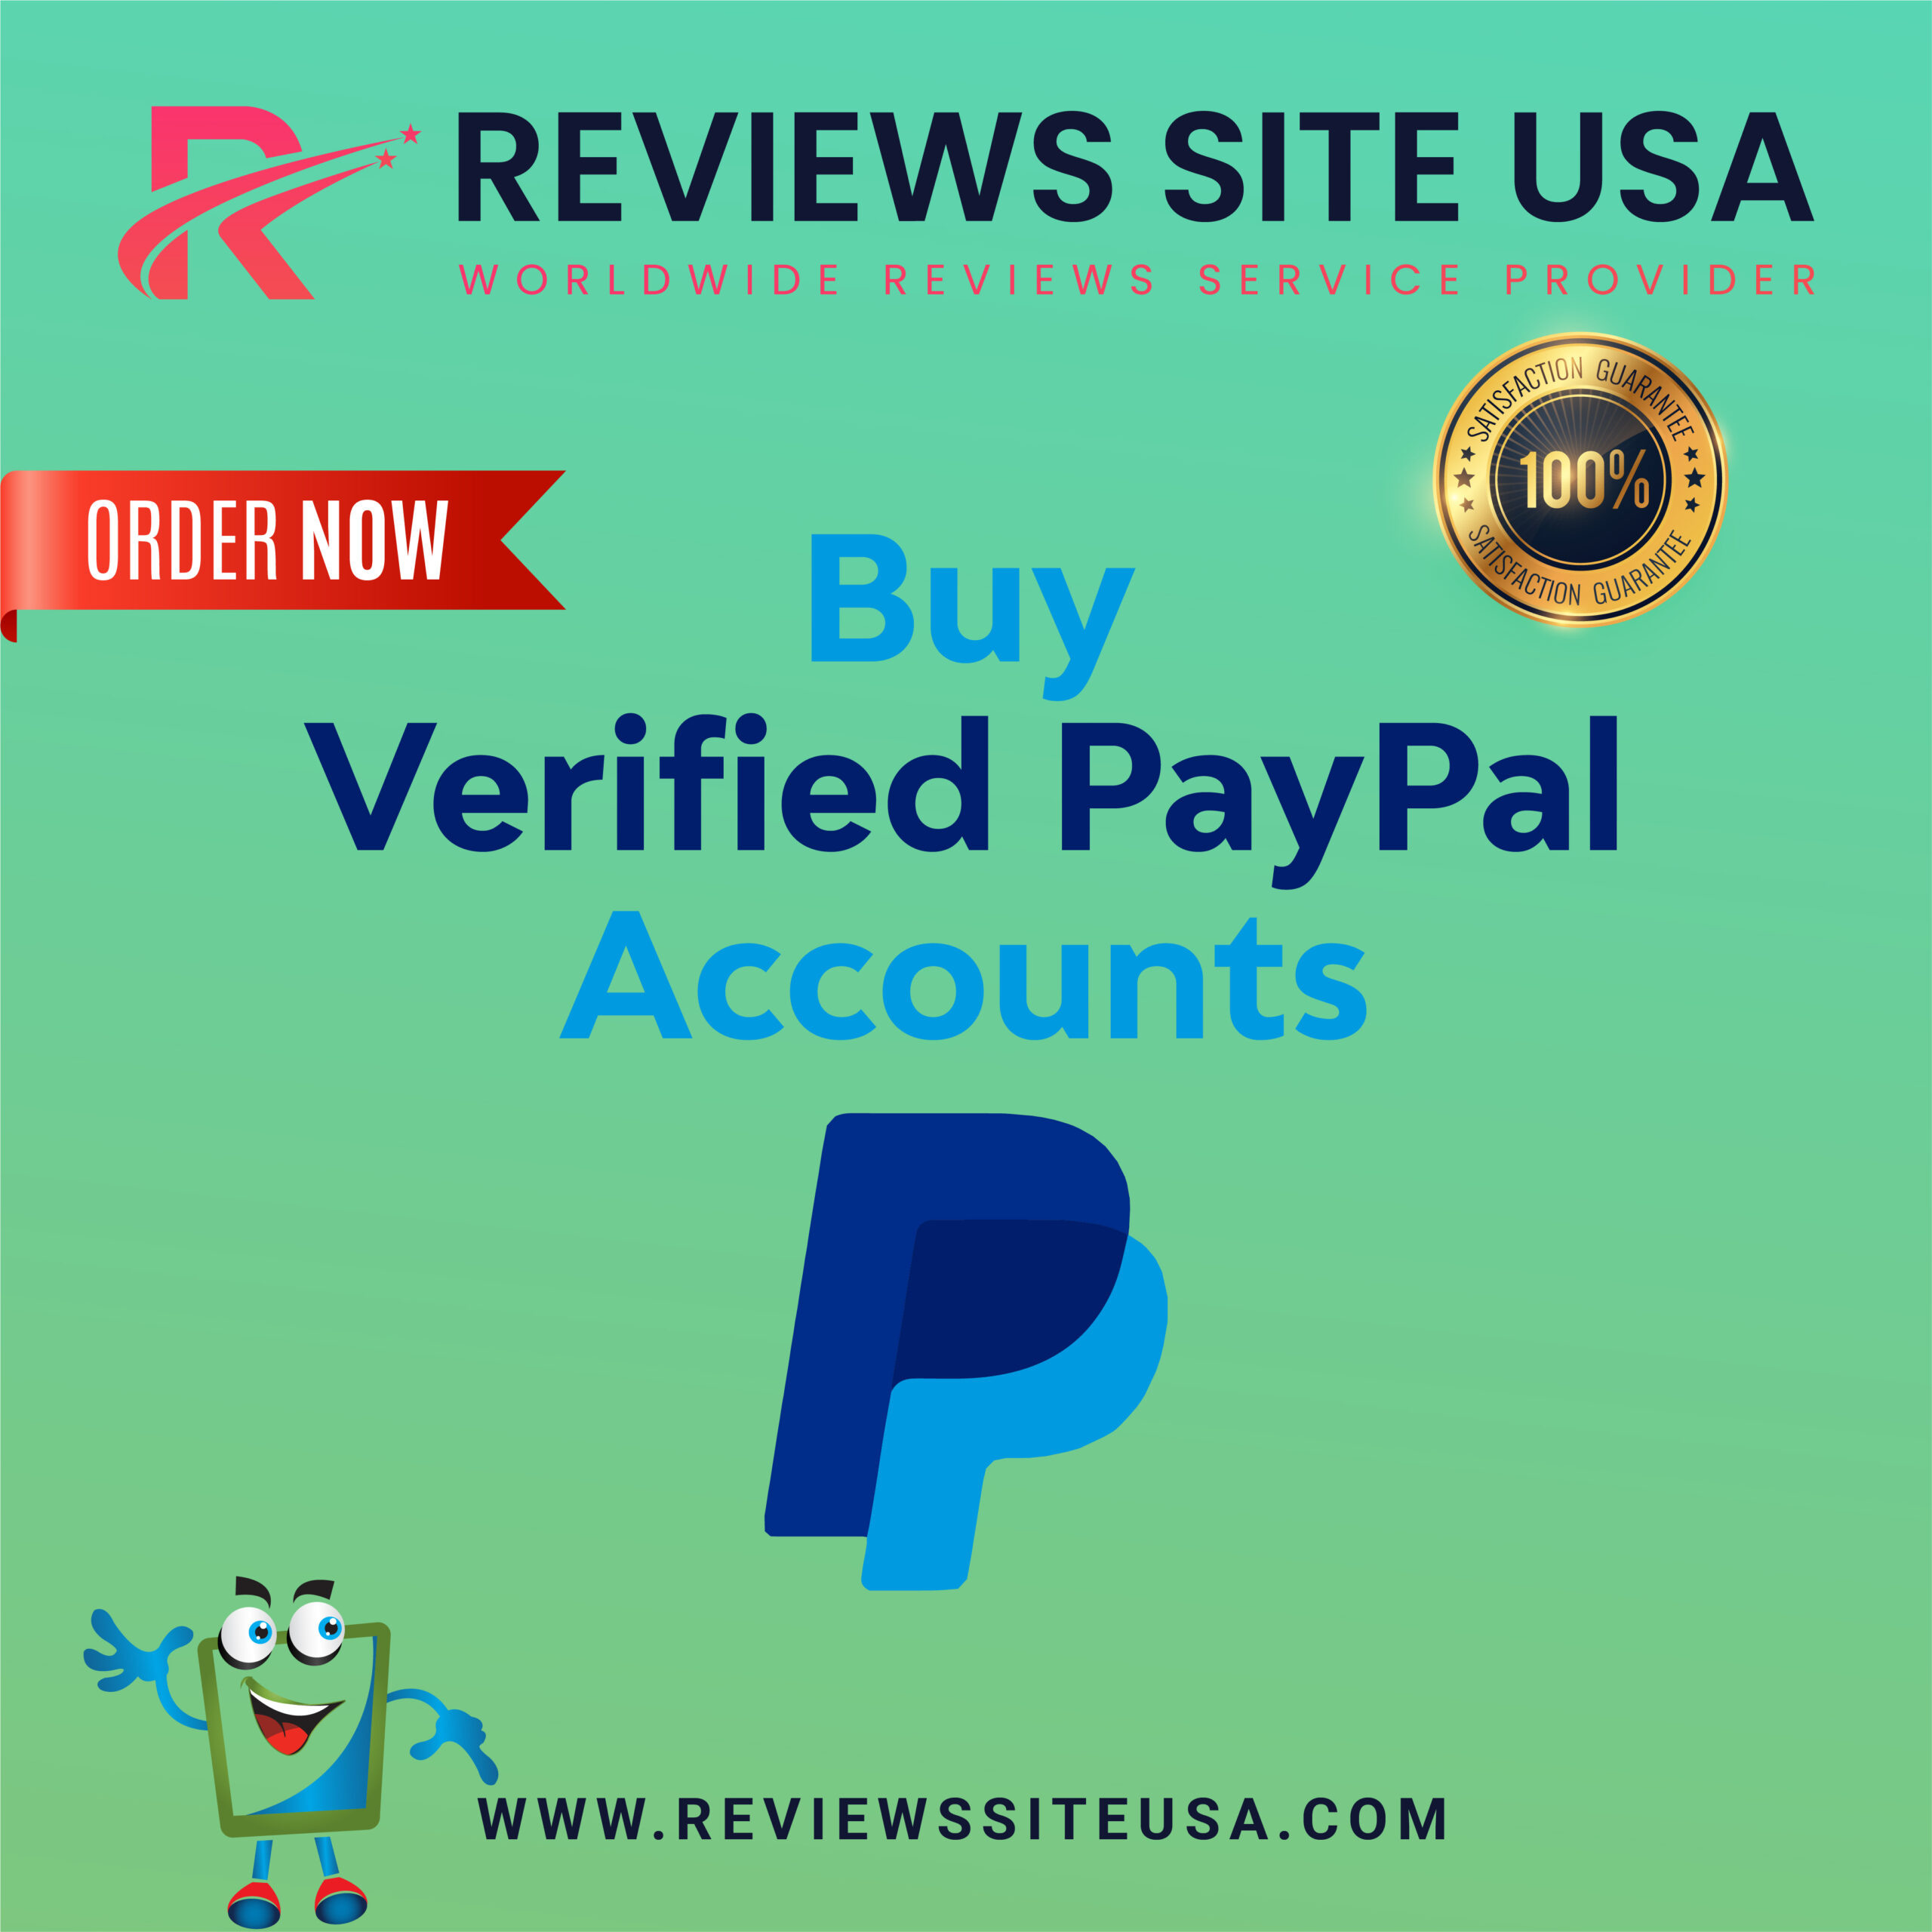 Buy Verified PayPal Accounts - 100% Fully Verified Best usa